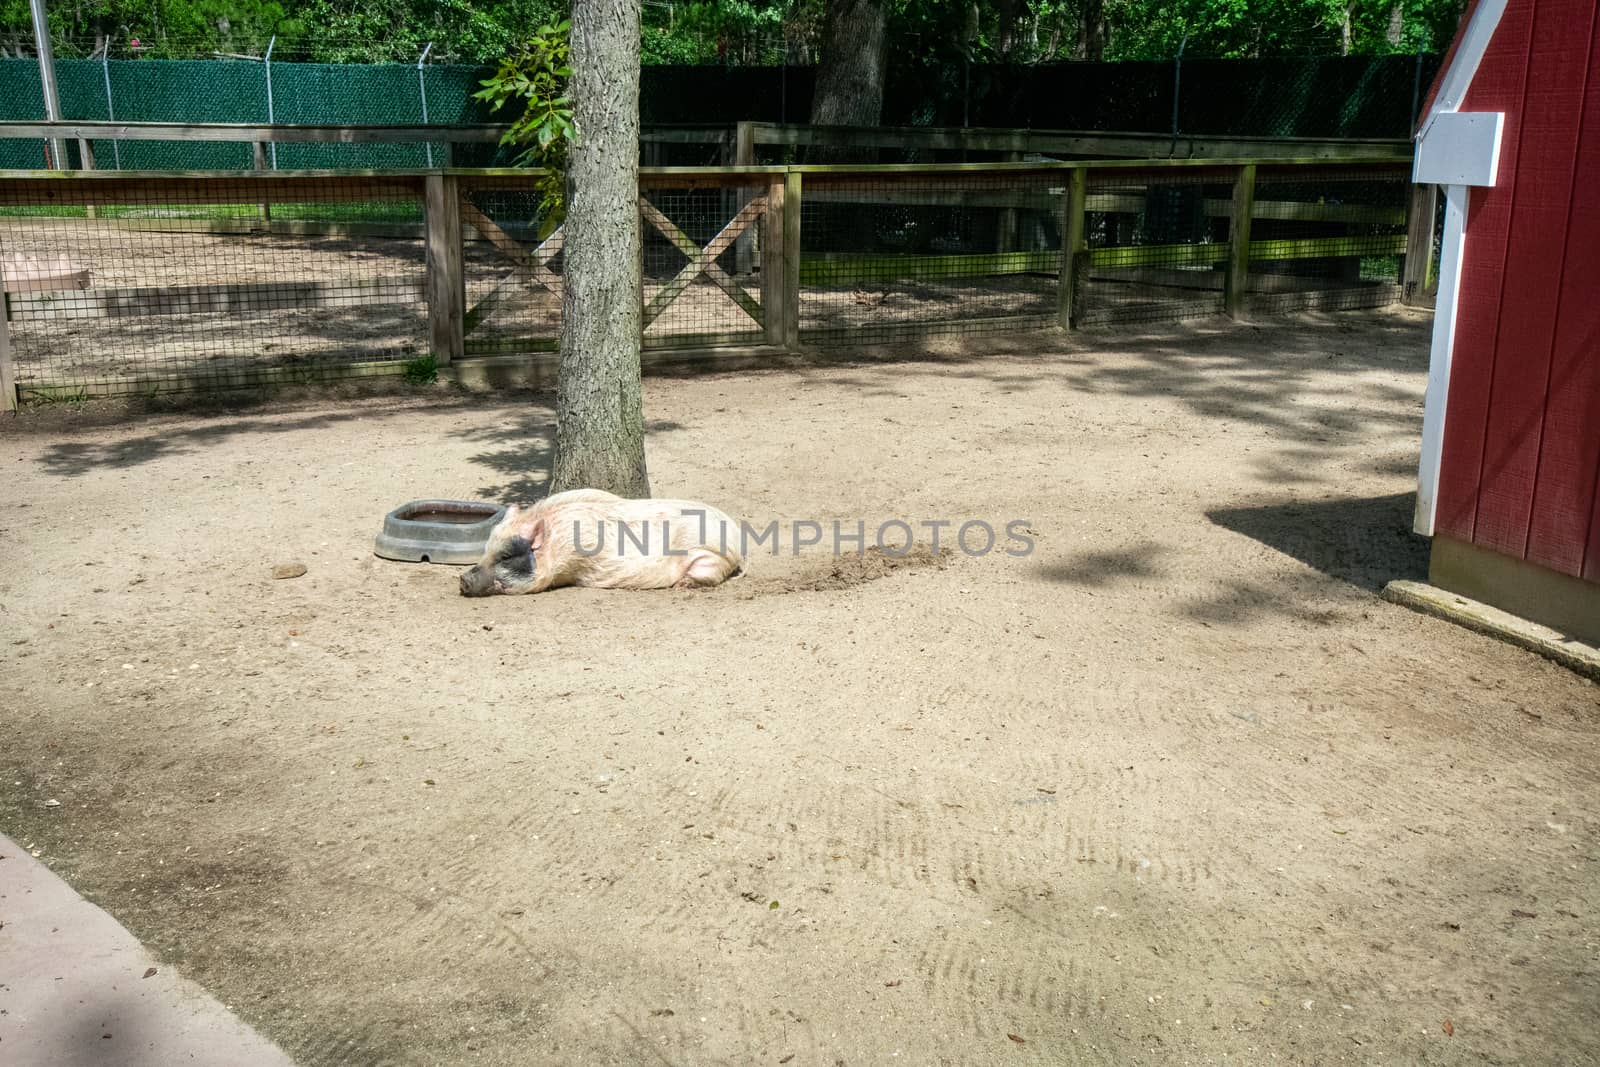 A Large White Wart Hog Lying Down in an Enclosure in a Zoo